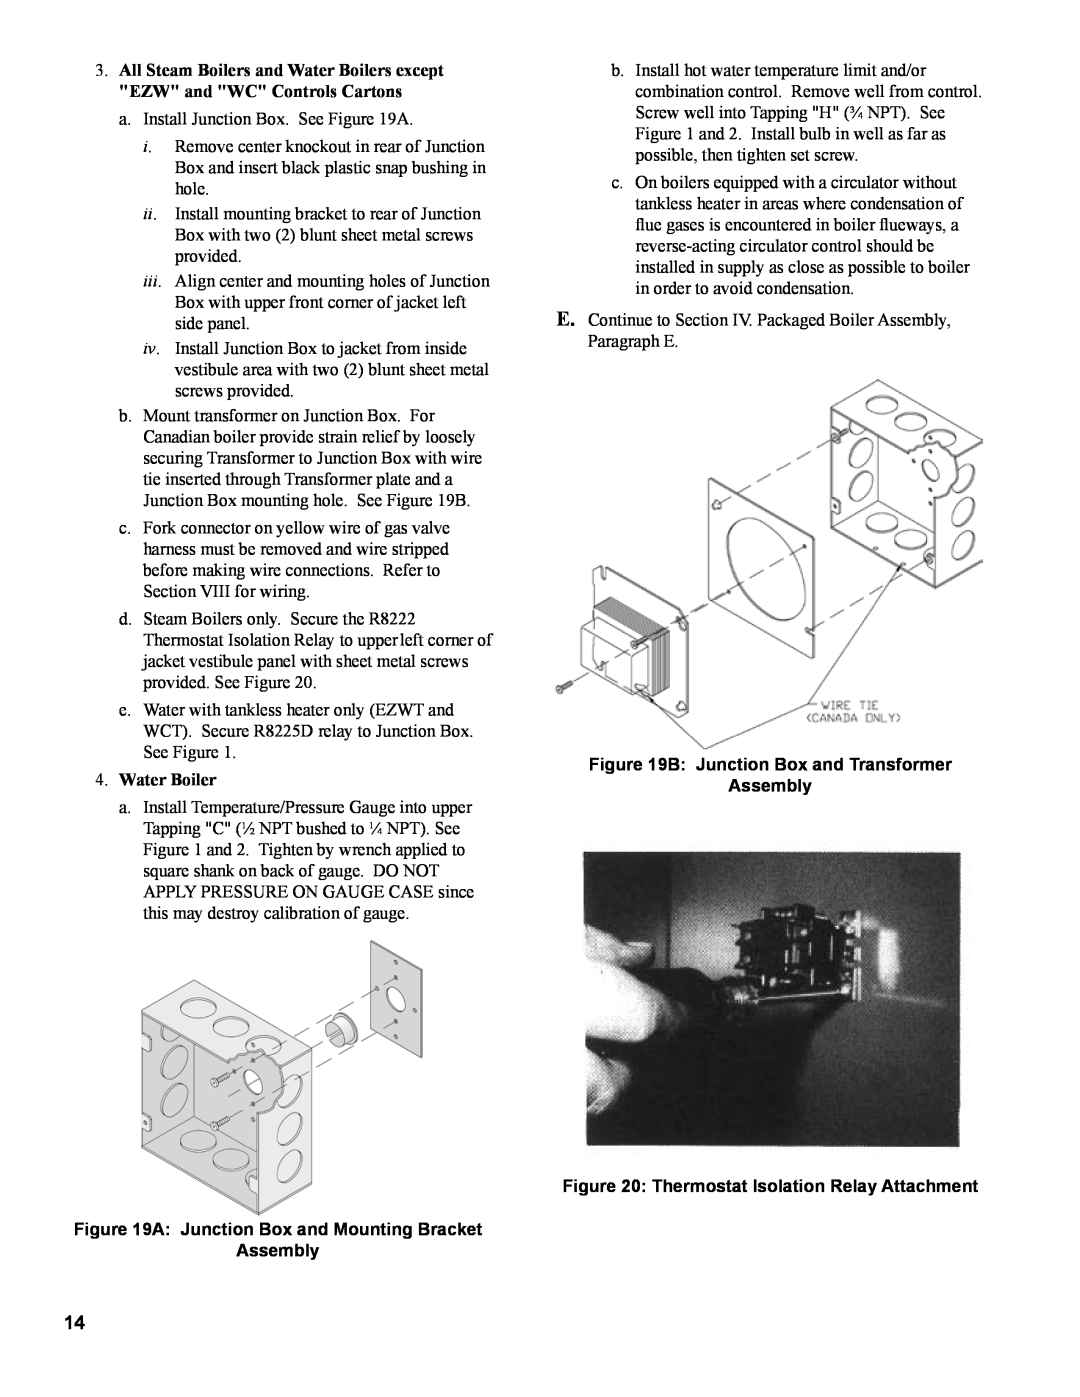 Burnham IN10 manual Water Boiler, A Junction Box and Mounting Bracket Assembly, B Junction Box and Transformer Assembly 